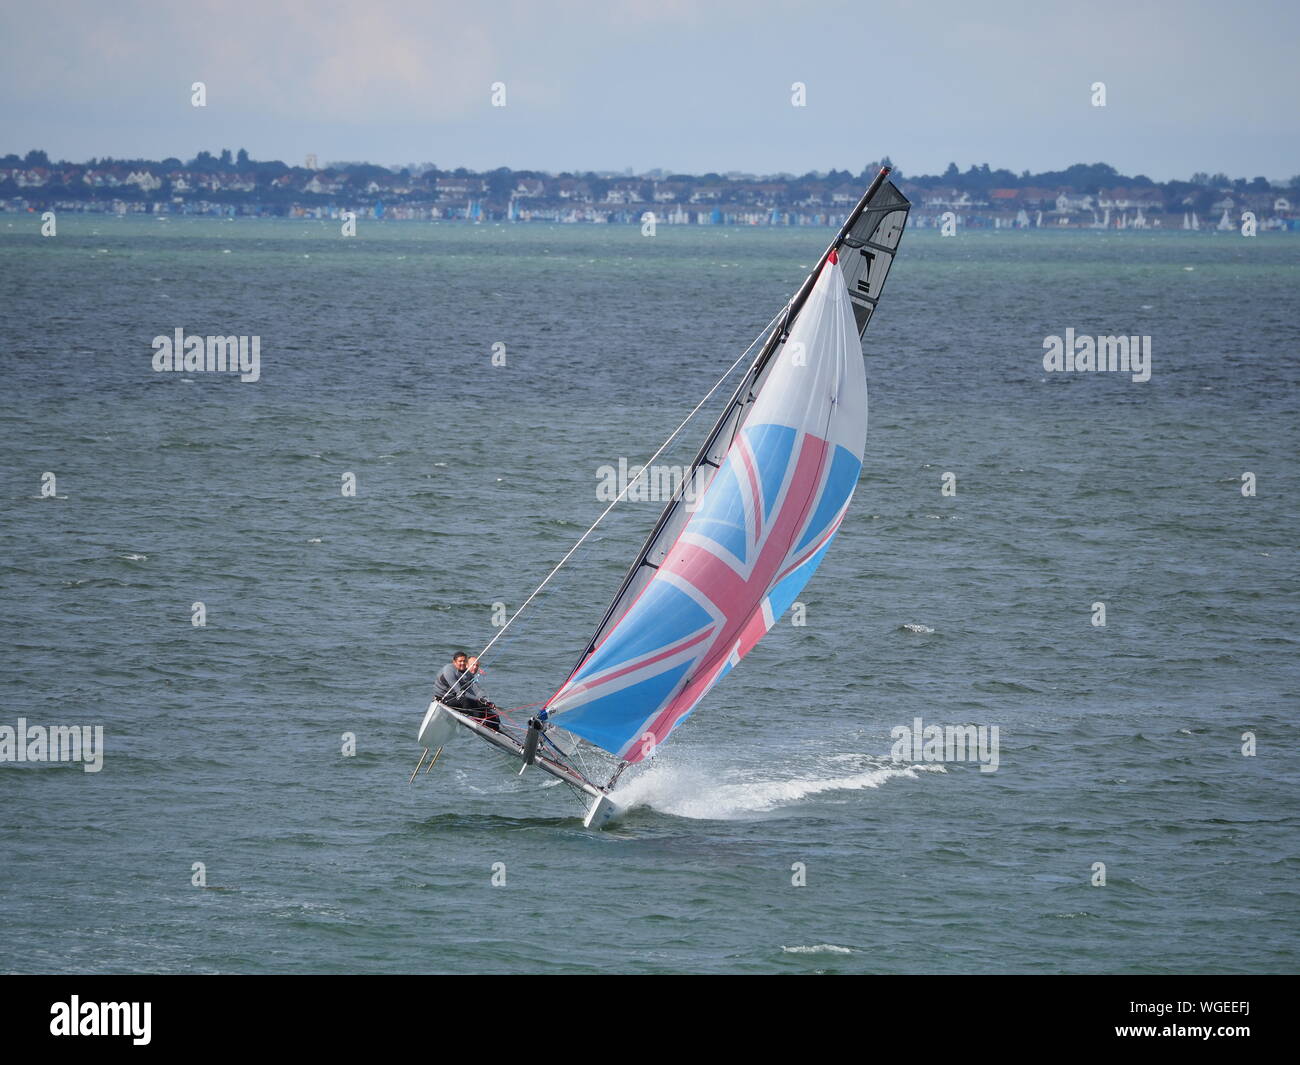 David Oakley High Resolution Stock Photography and Images - Alamy